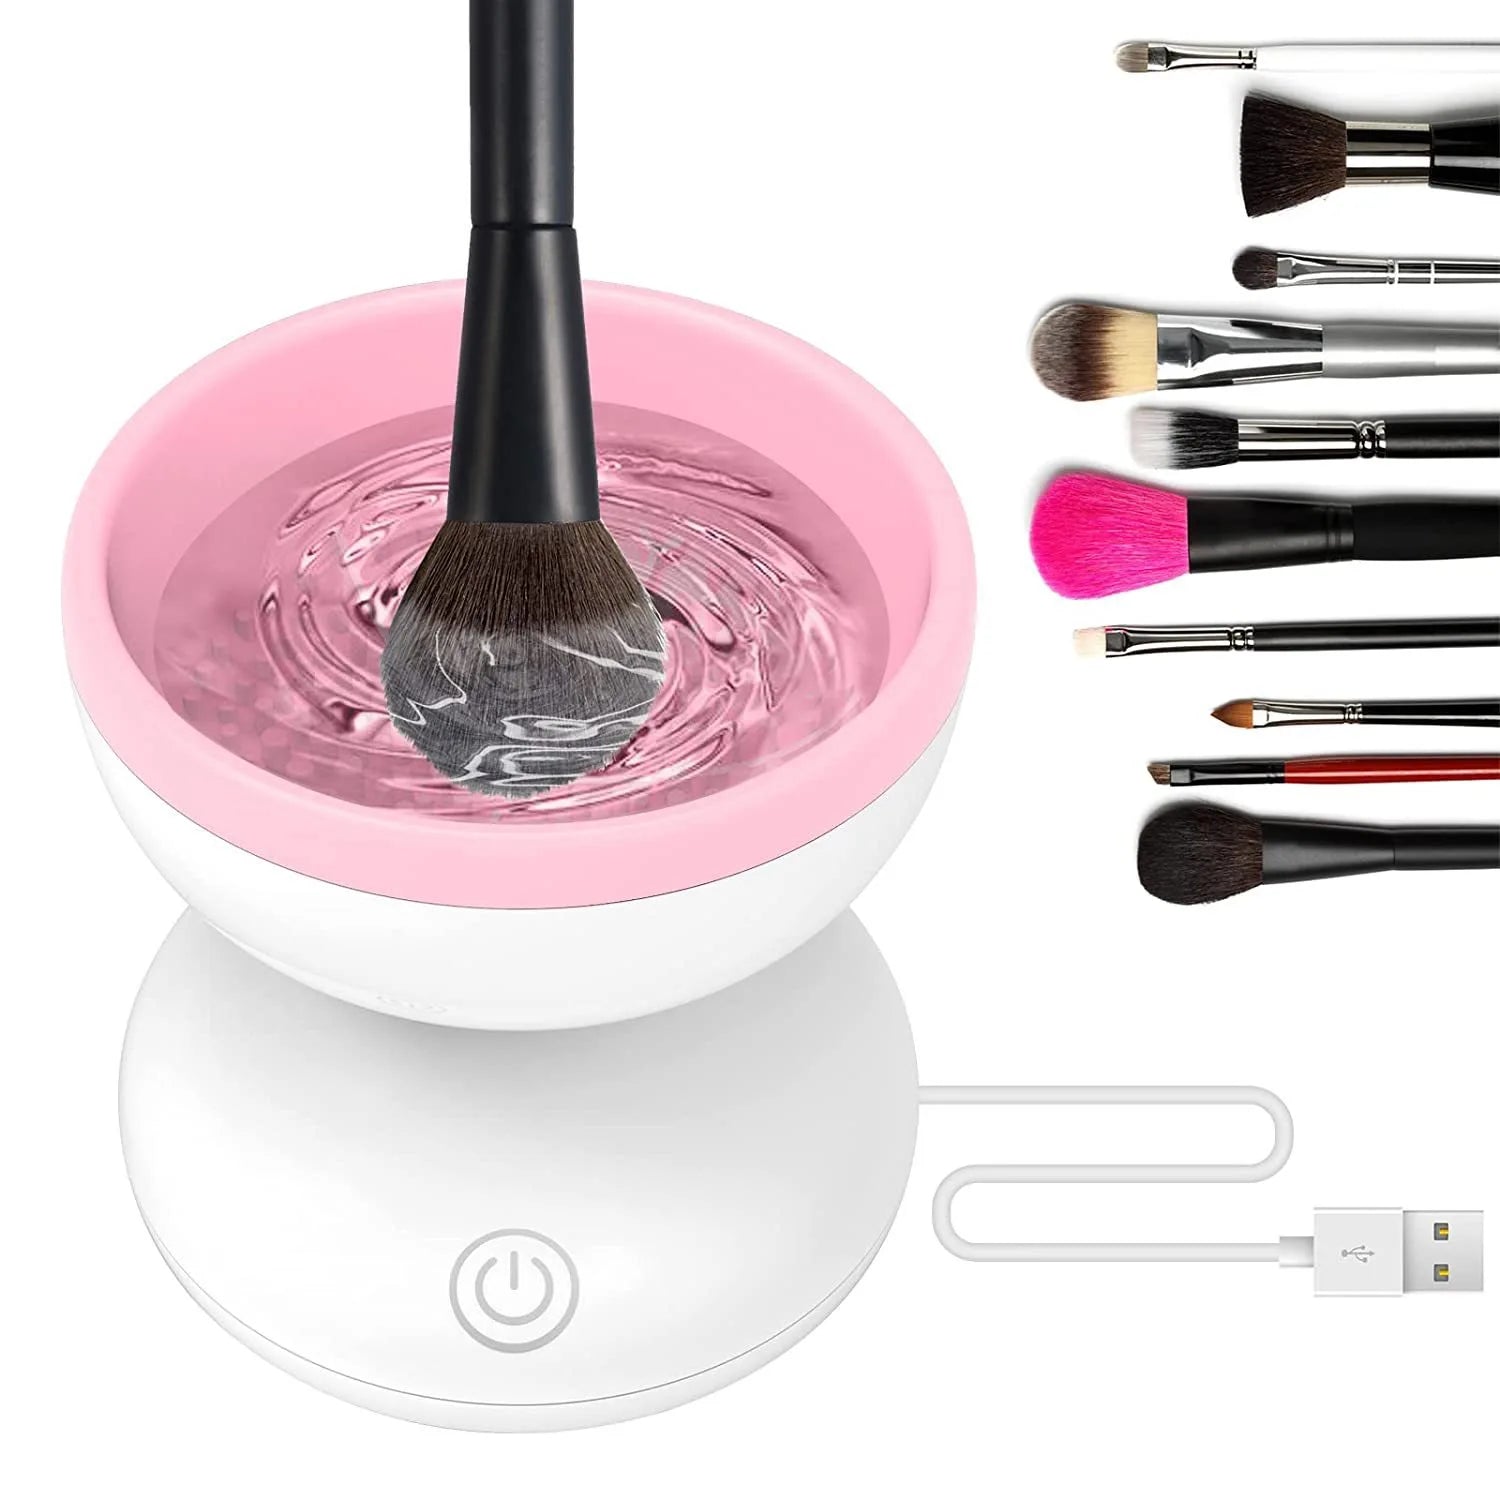 SpinX: The Electric Makeup Brush Cleaner